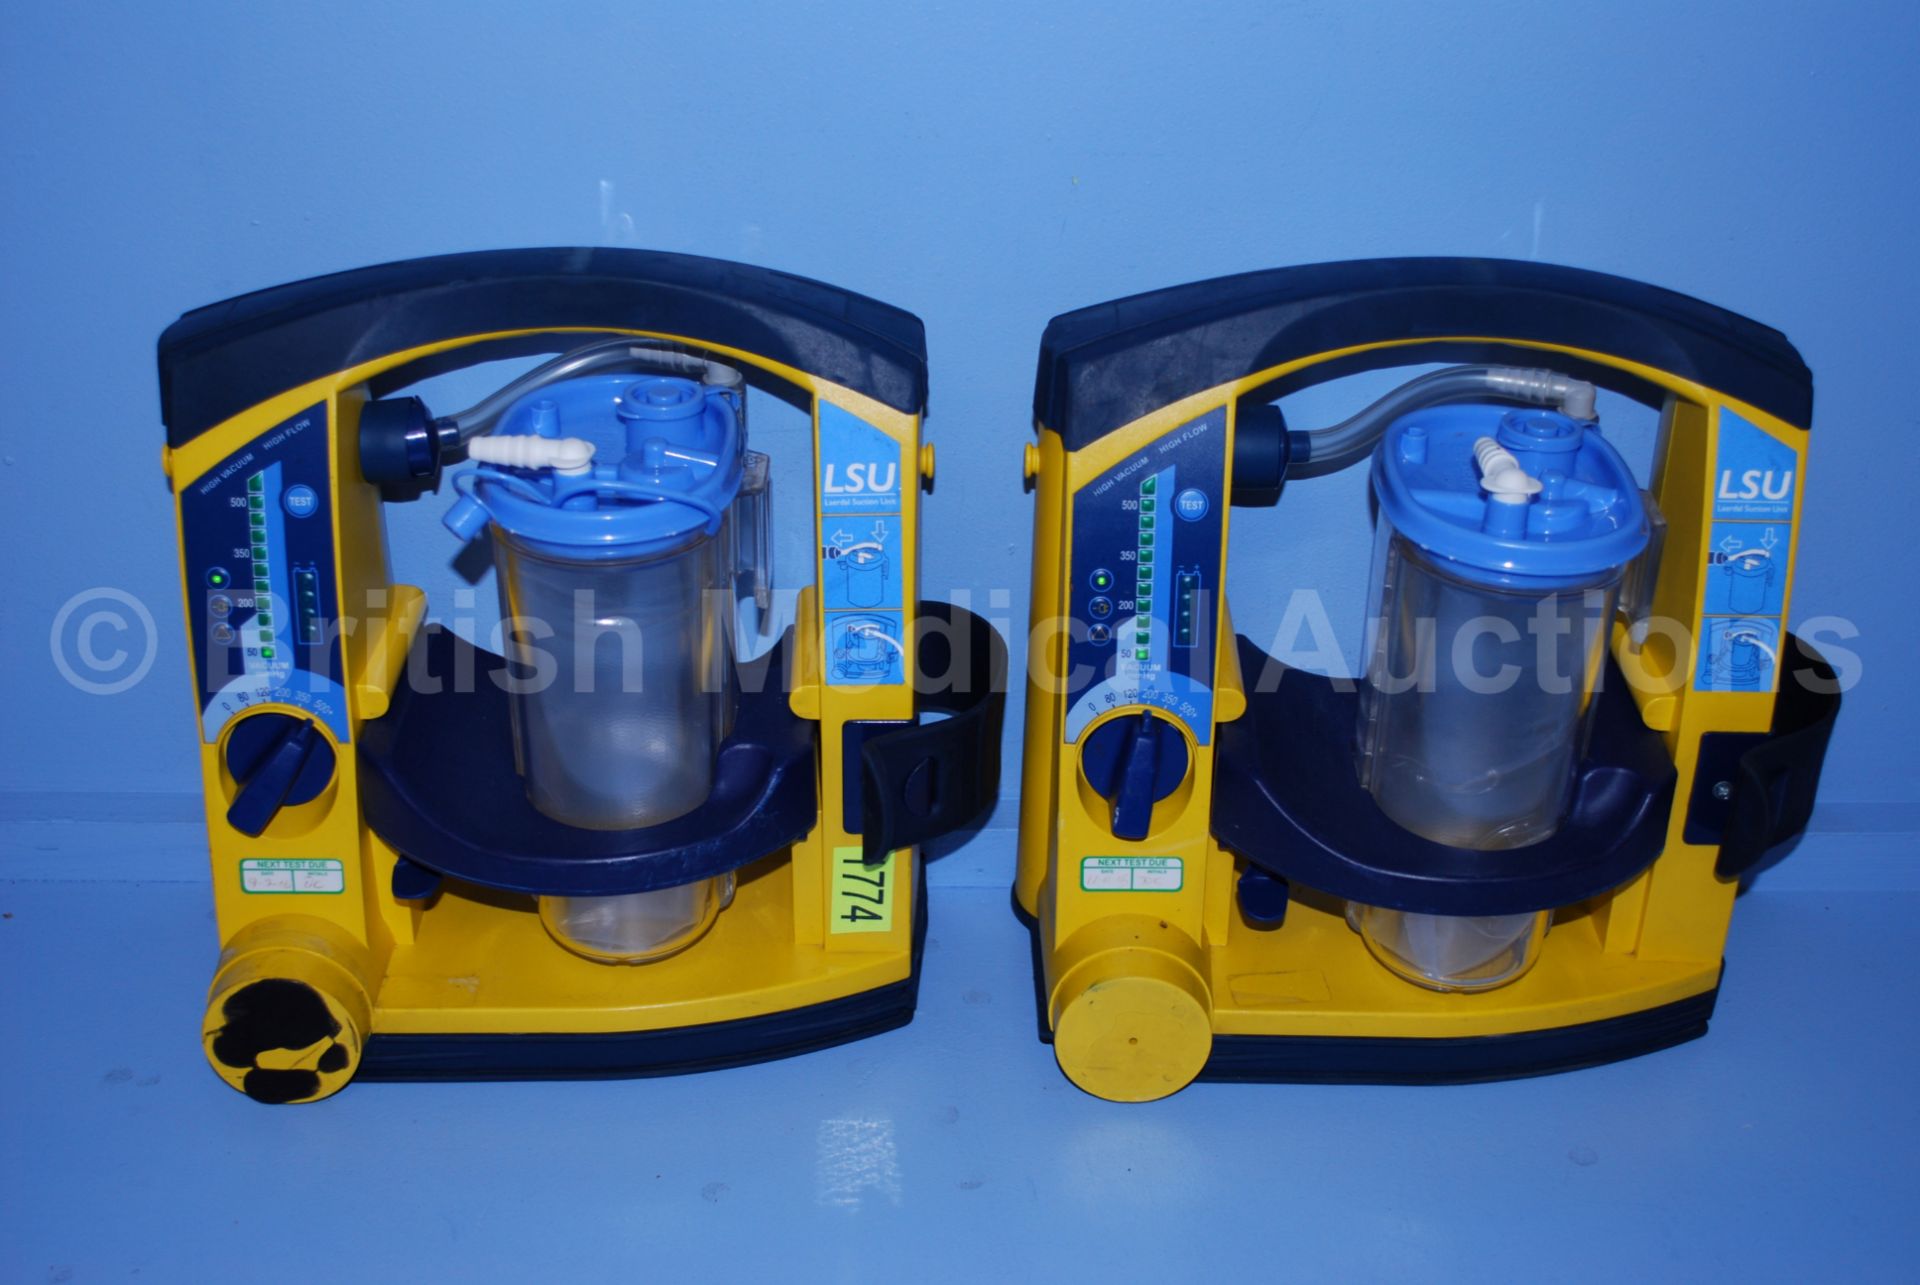 2 x Laerdal Suction Units with New Serres Cups (Bo